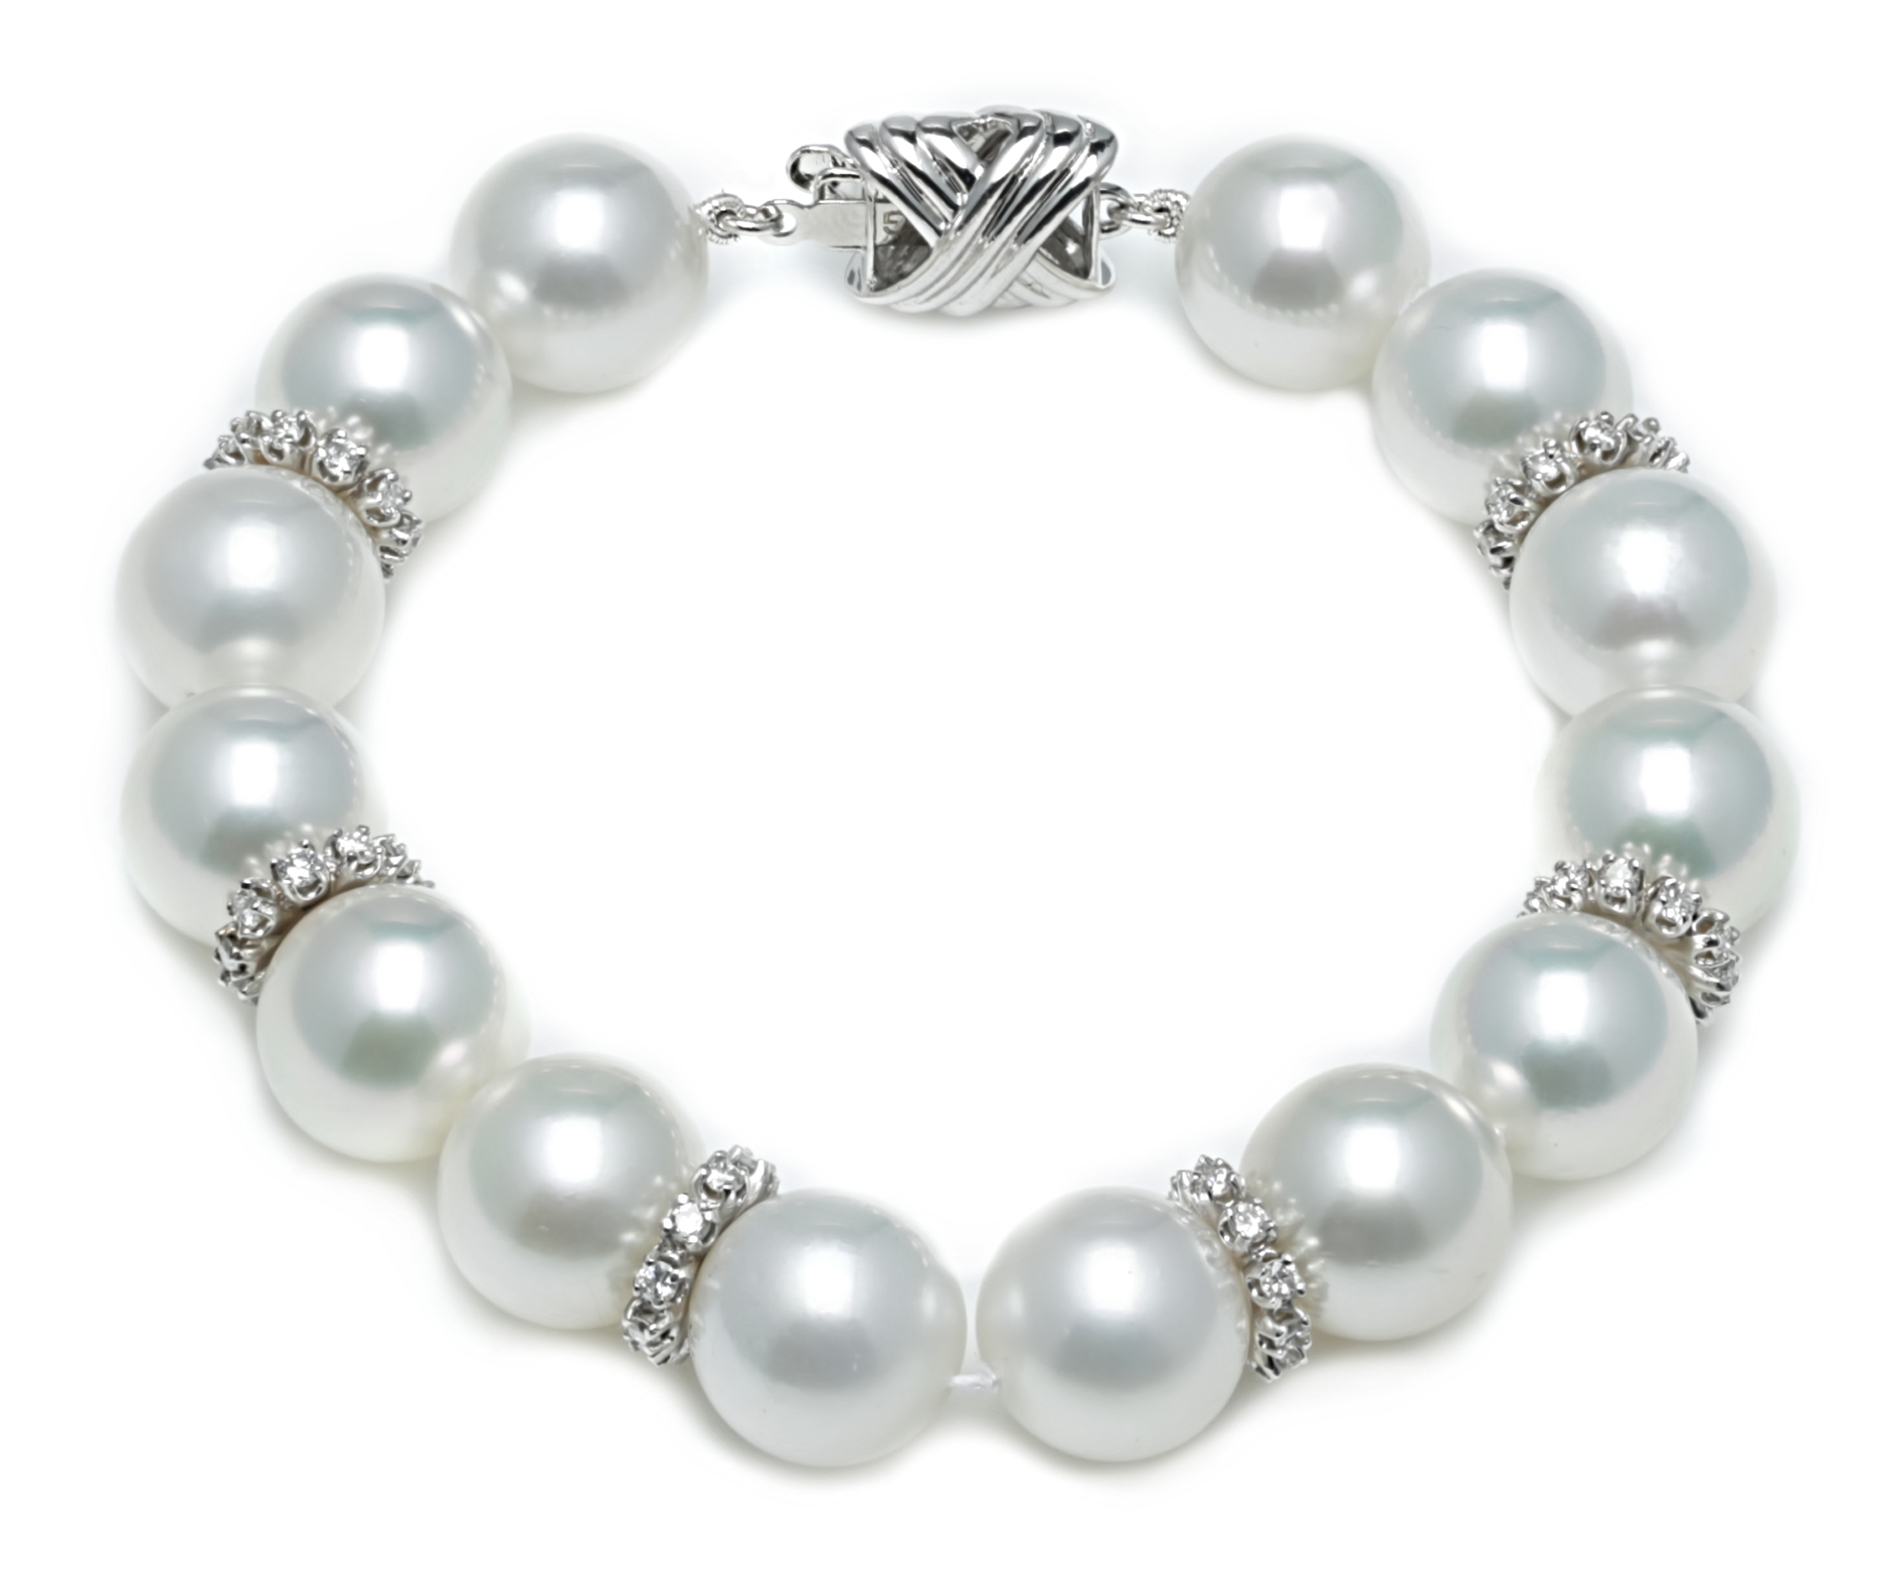 Details about   gorgeous 12-13mm south sea white pearl bracelet 7.5-8"